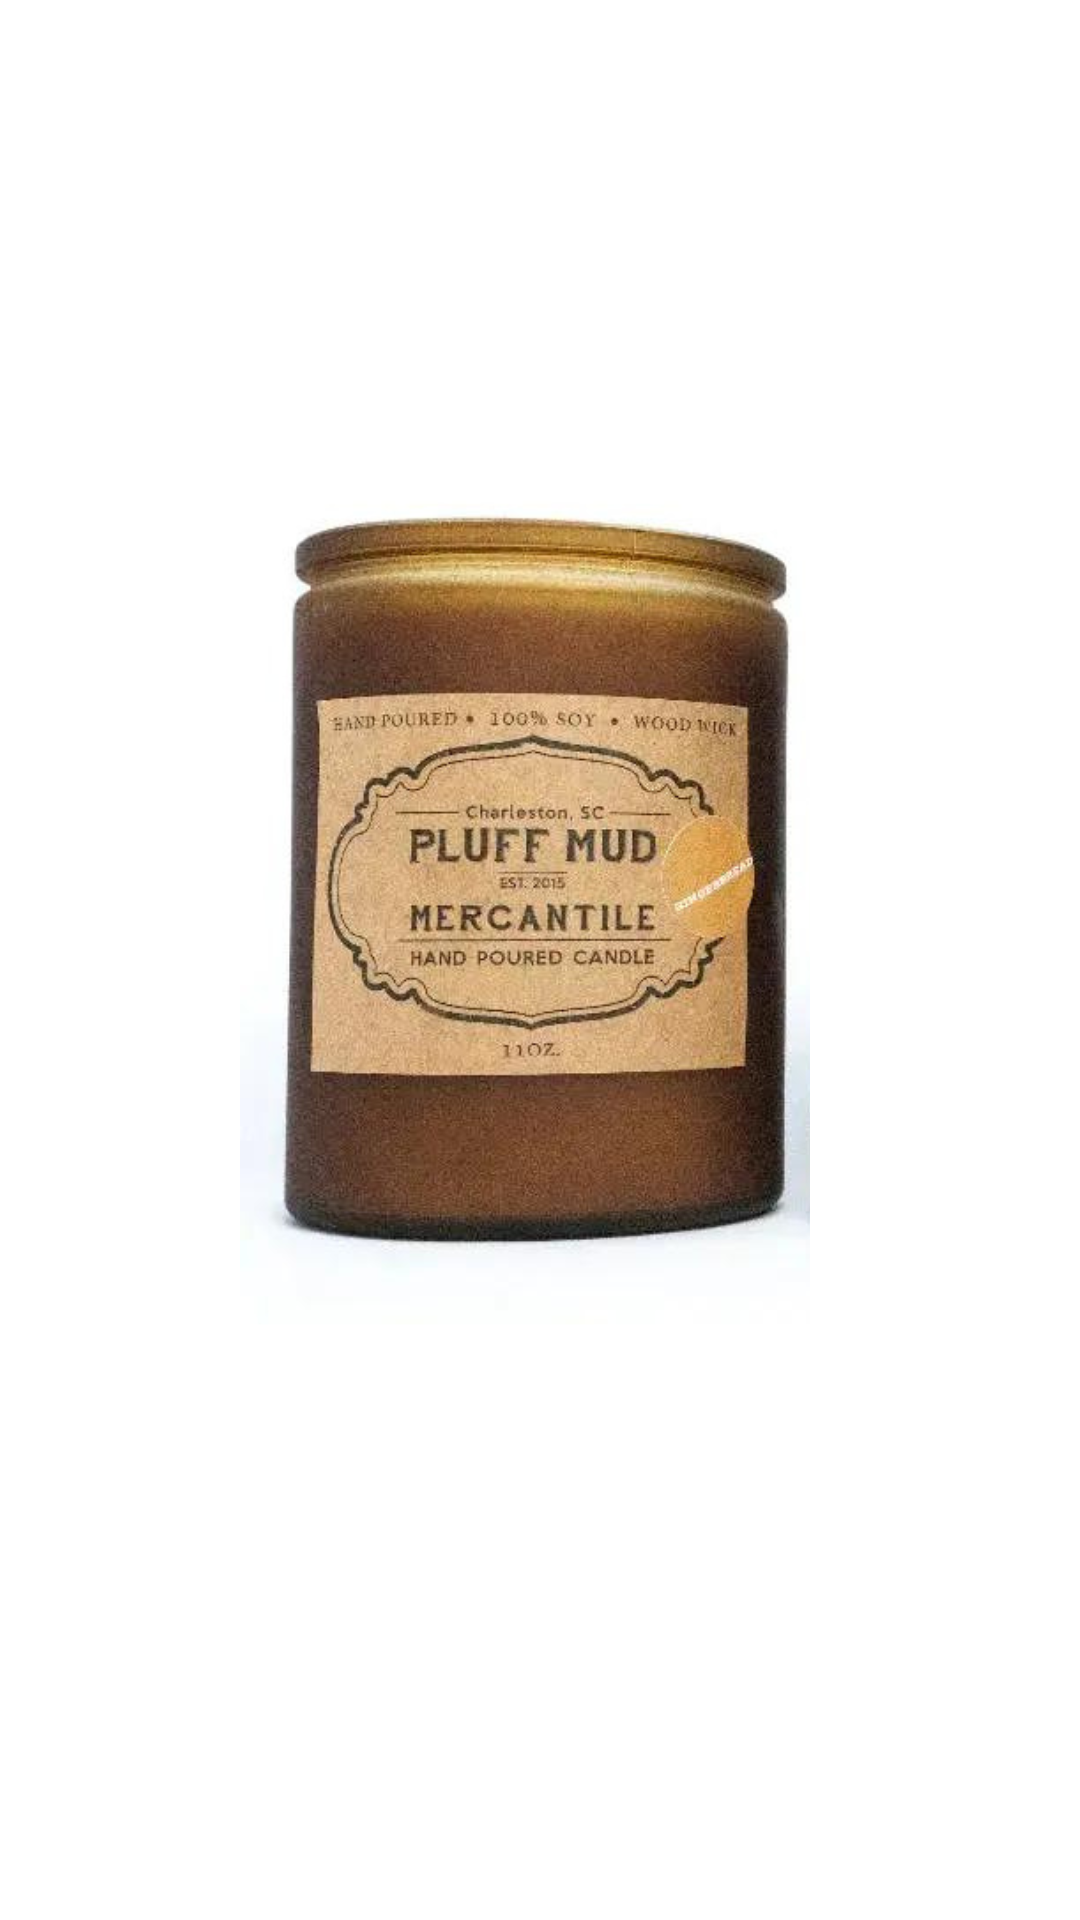 Cornbread Hand Poured Soy Candle - Pluff Mud Mercantile